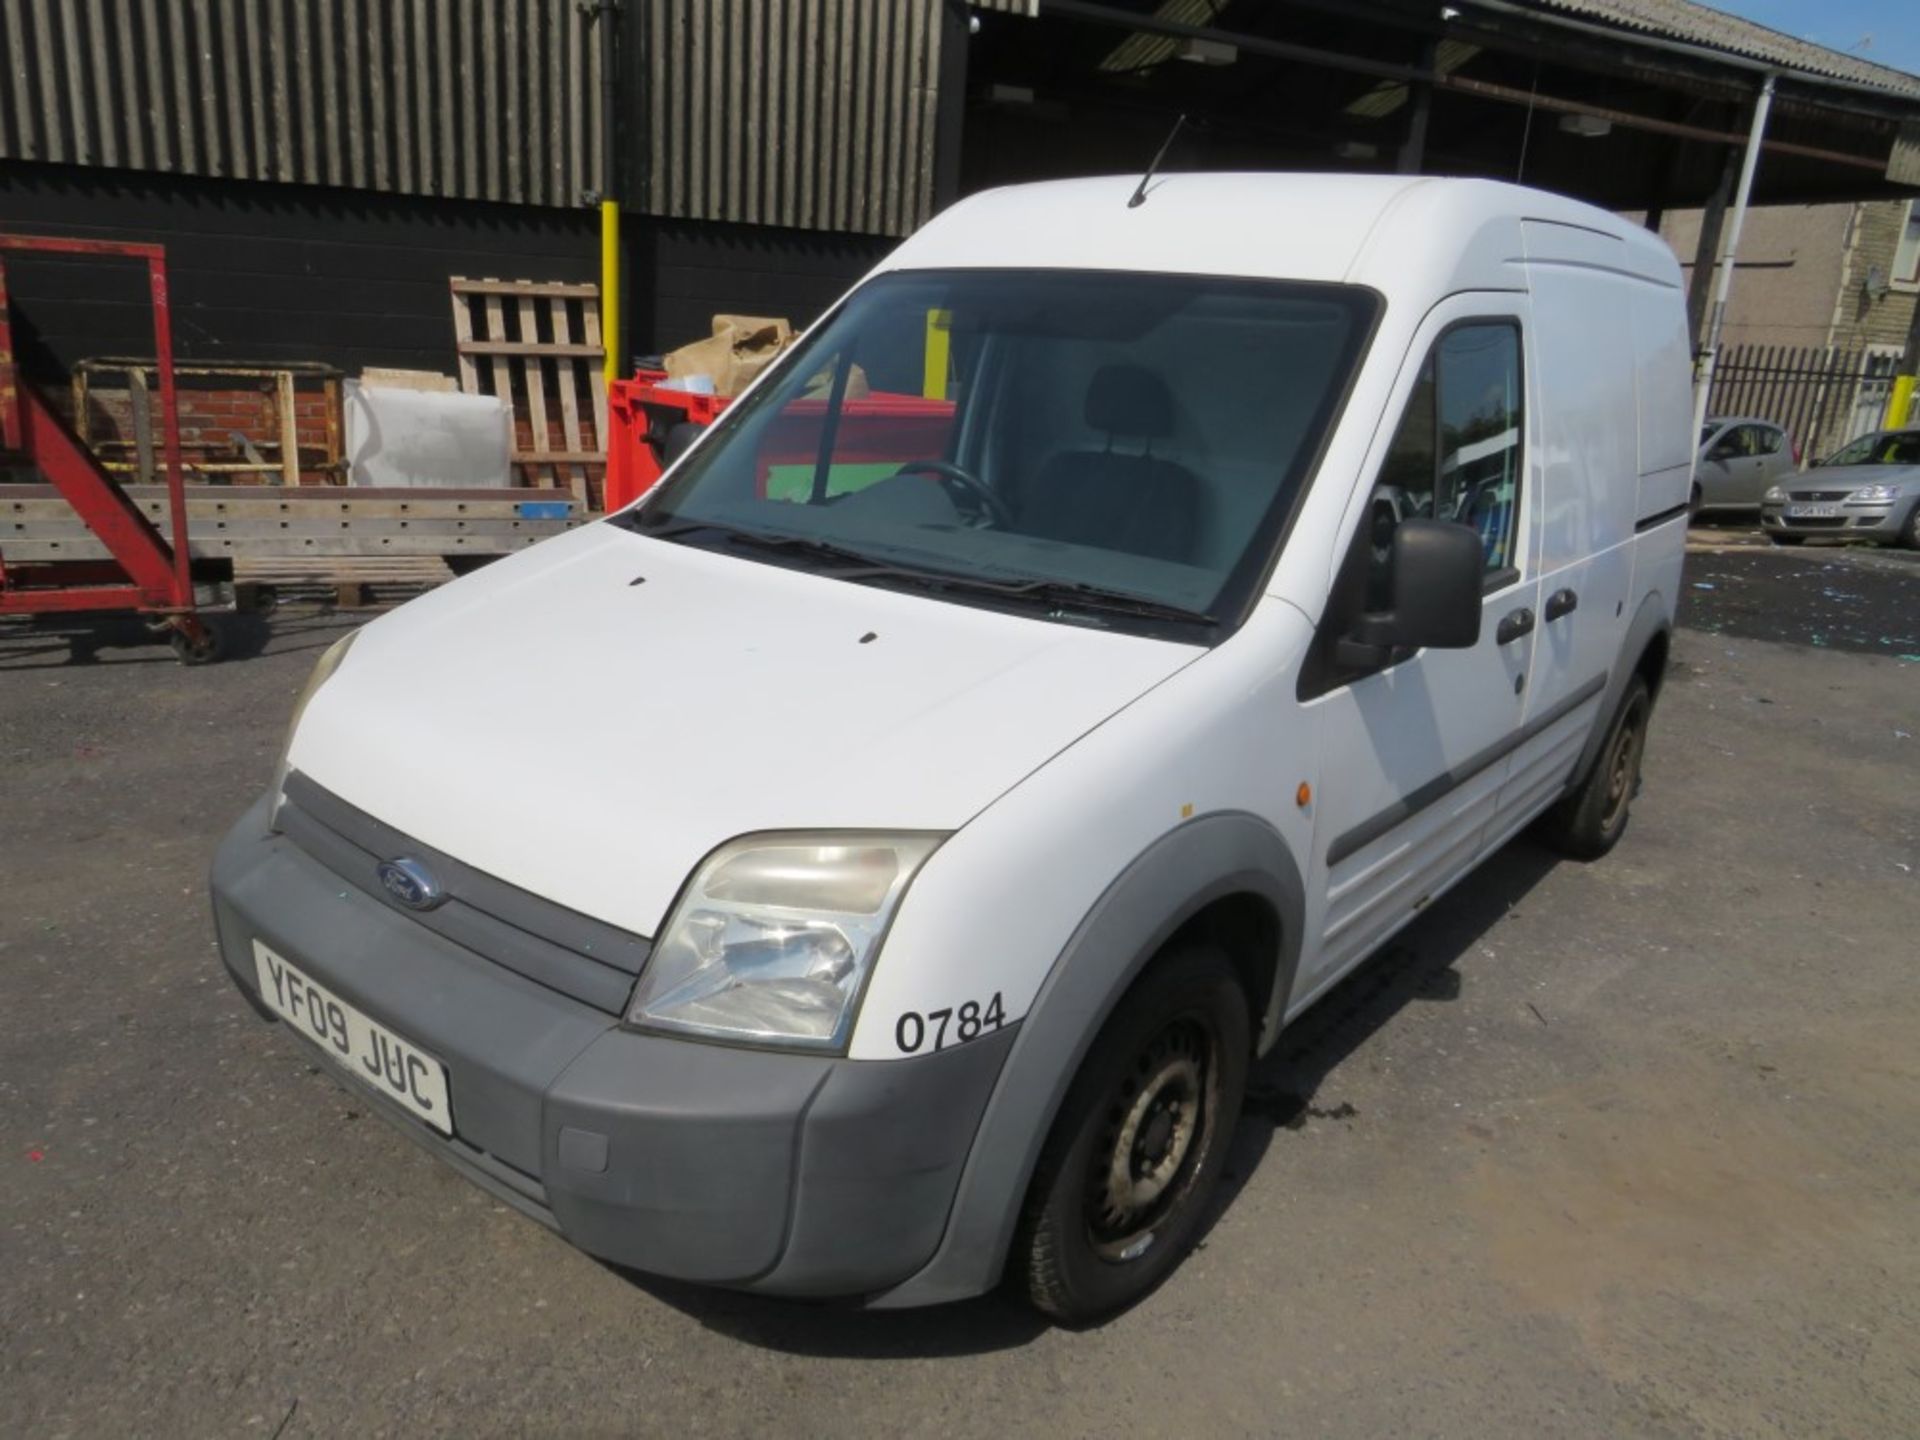 09 reg FORD TRANSIT CONNECT T230 L90 (DIRECT COUNCIL) 1ST REG 06/09, TEST 05/22, 89020M, V5 HERE, - Image 2 of 7